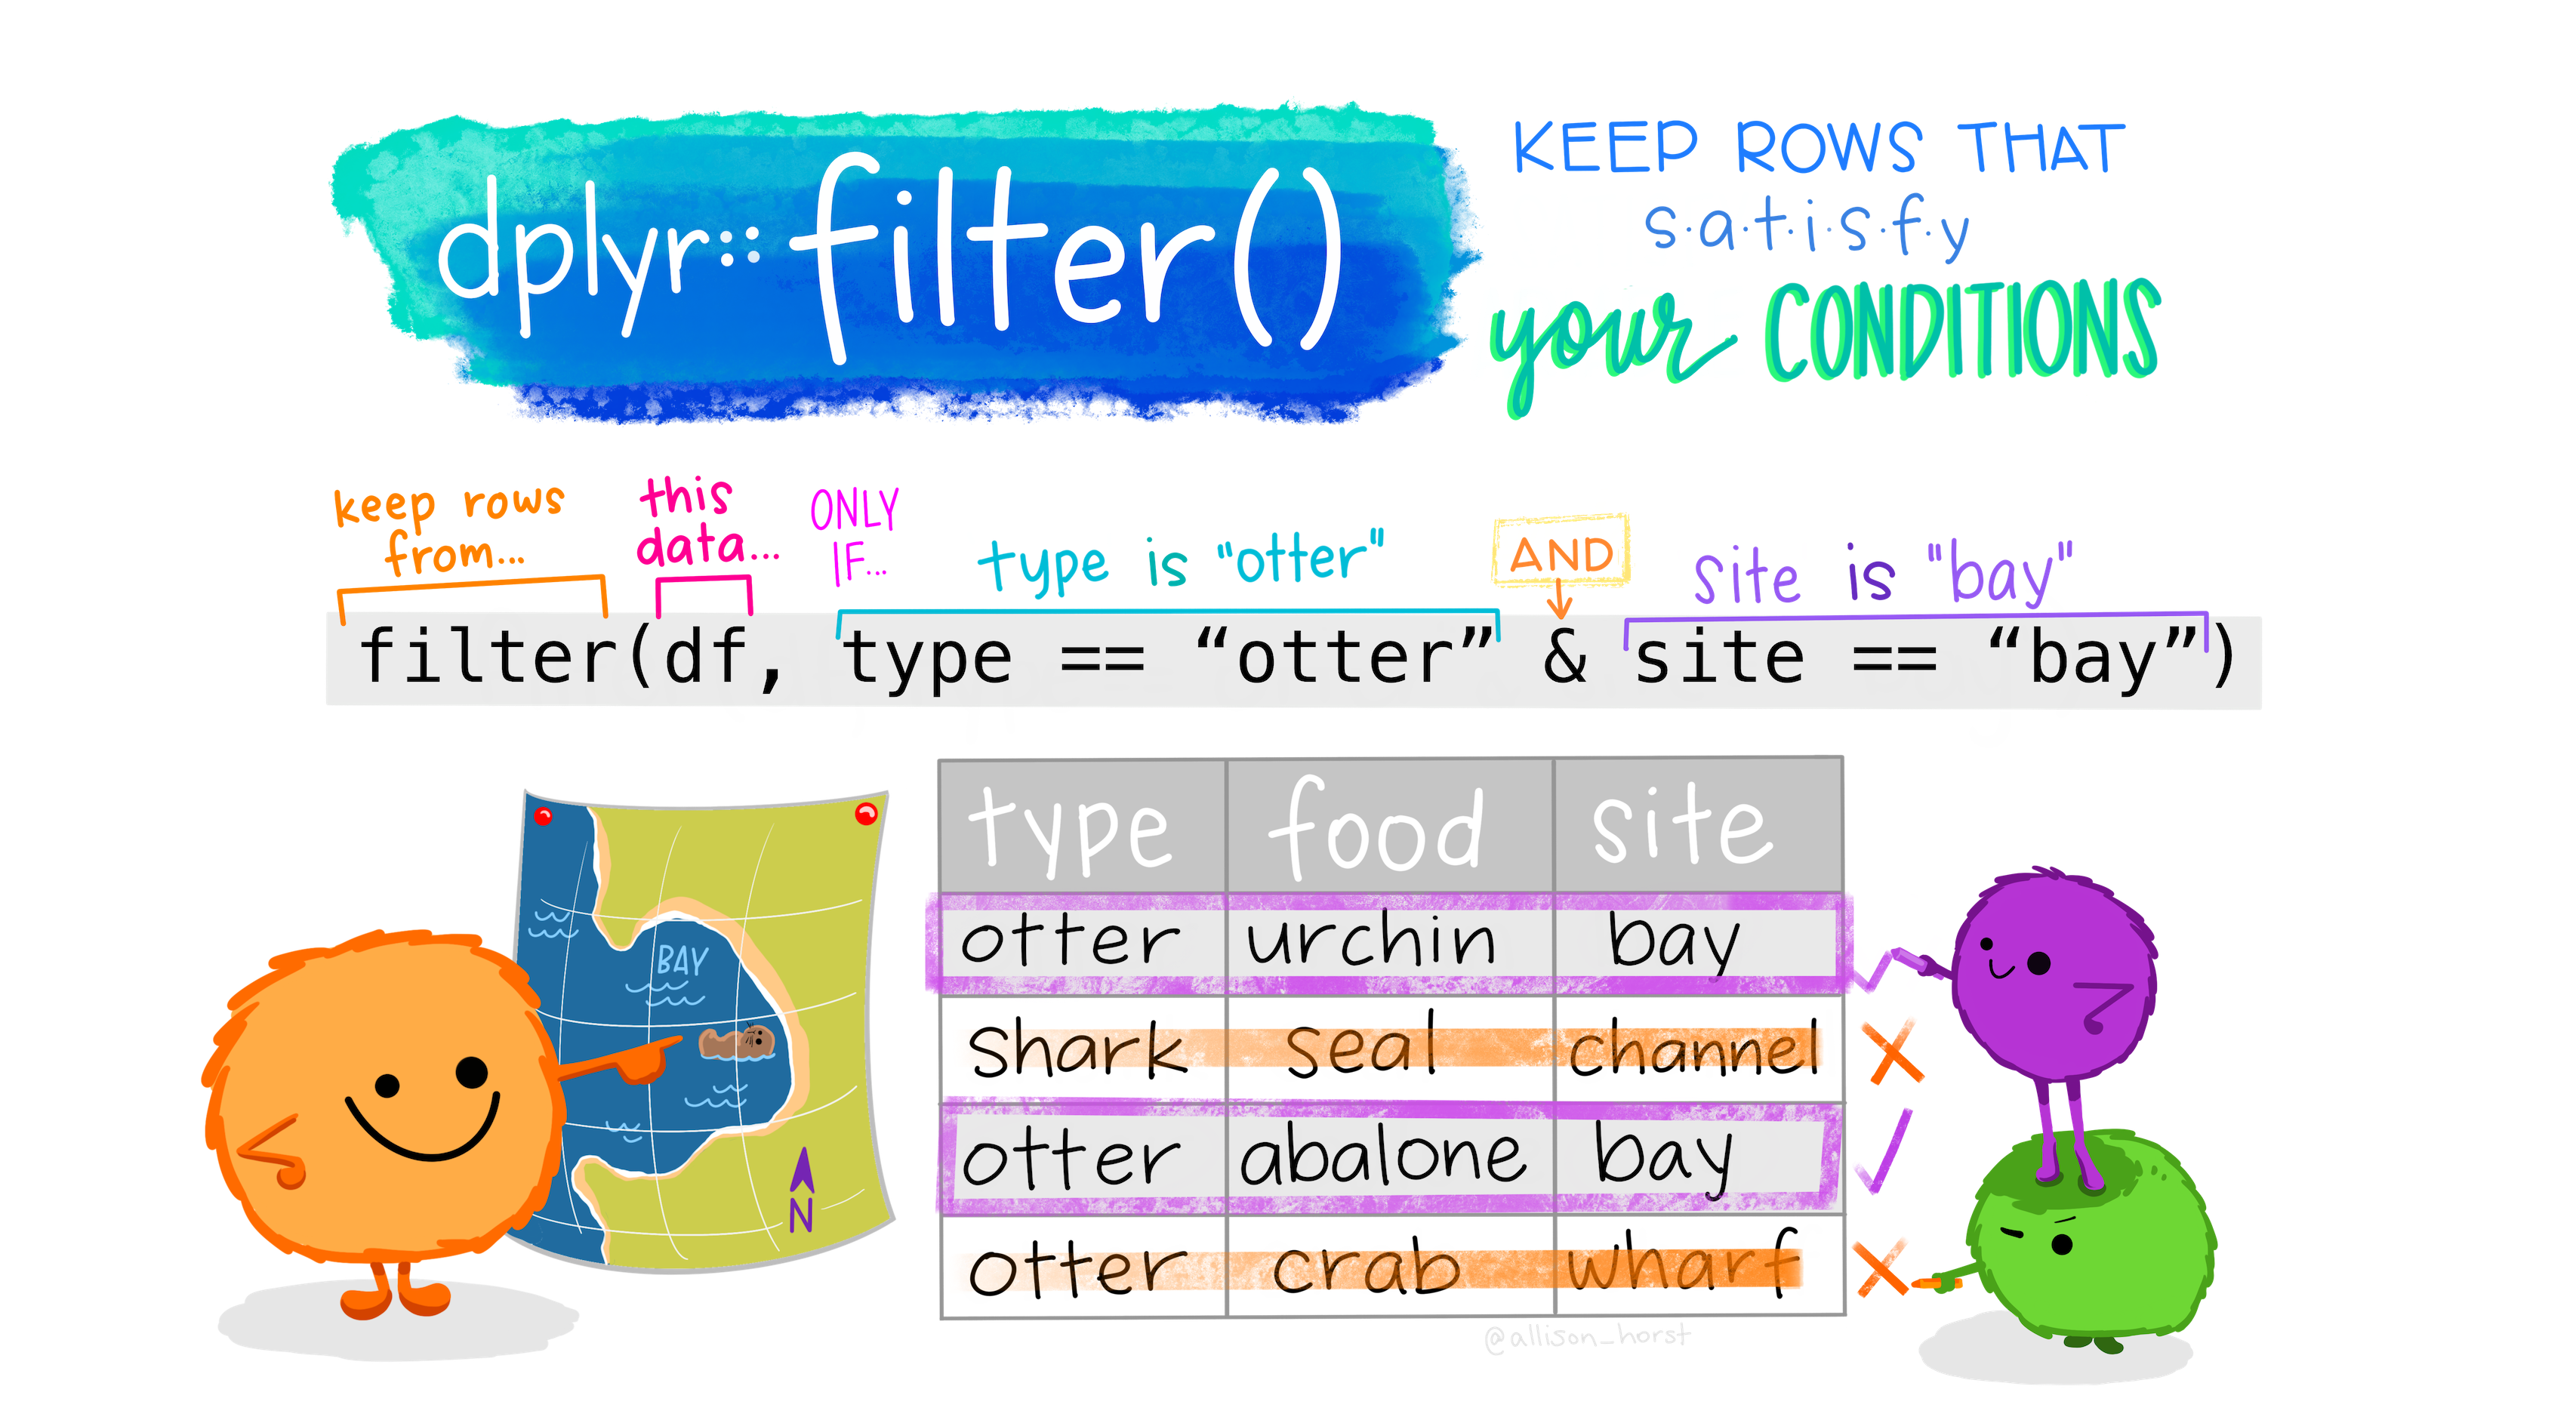 Cartoon showing three fuzzy monsters either selecting or crossing out rows of a data table. If the type of animal in the table is “otter” and the site is “bay”, a monster is drawing a purple rectangle around the row. If those conditions are not met, another monster is putting a line through the column indicating it will be excluded. Stylized text reads “dplyr::filter() - keep rows that satisfy your conditions.” Learn more about dplyr::filter.